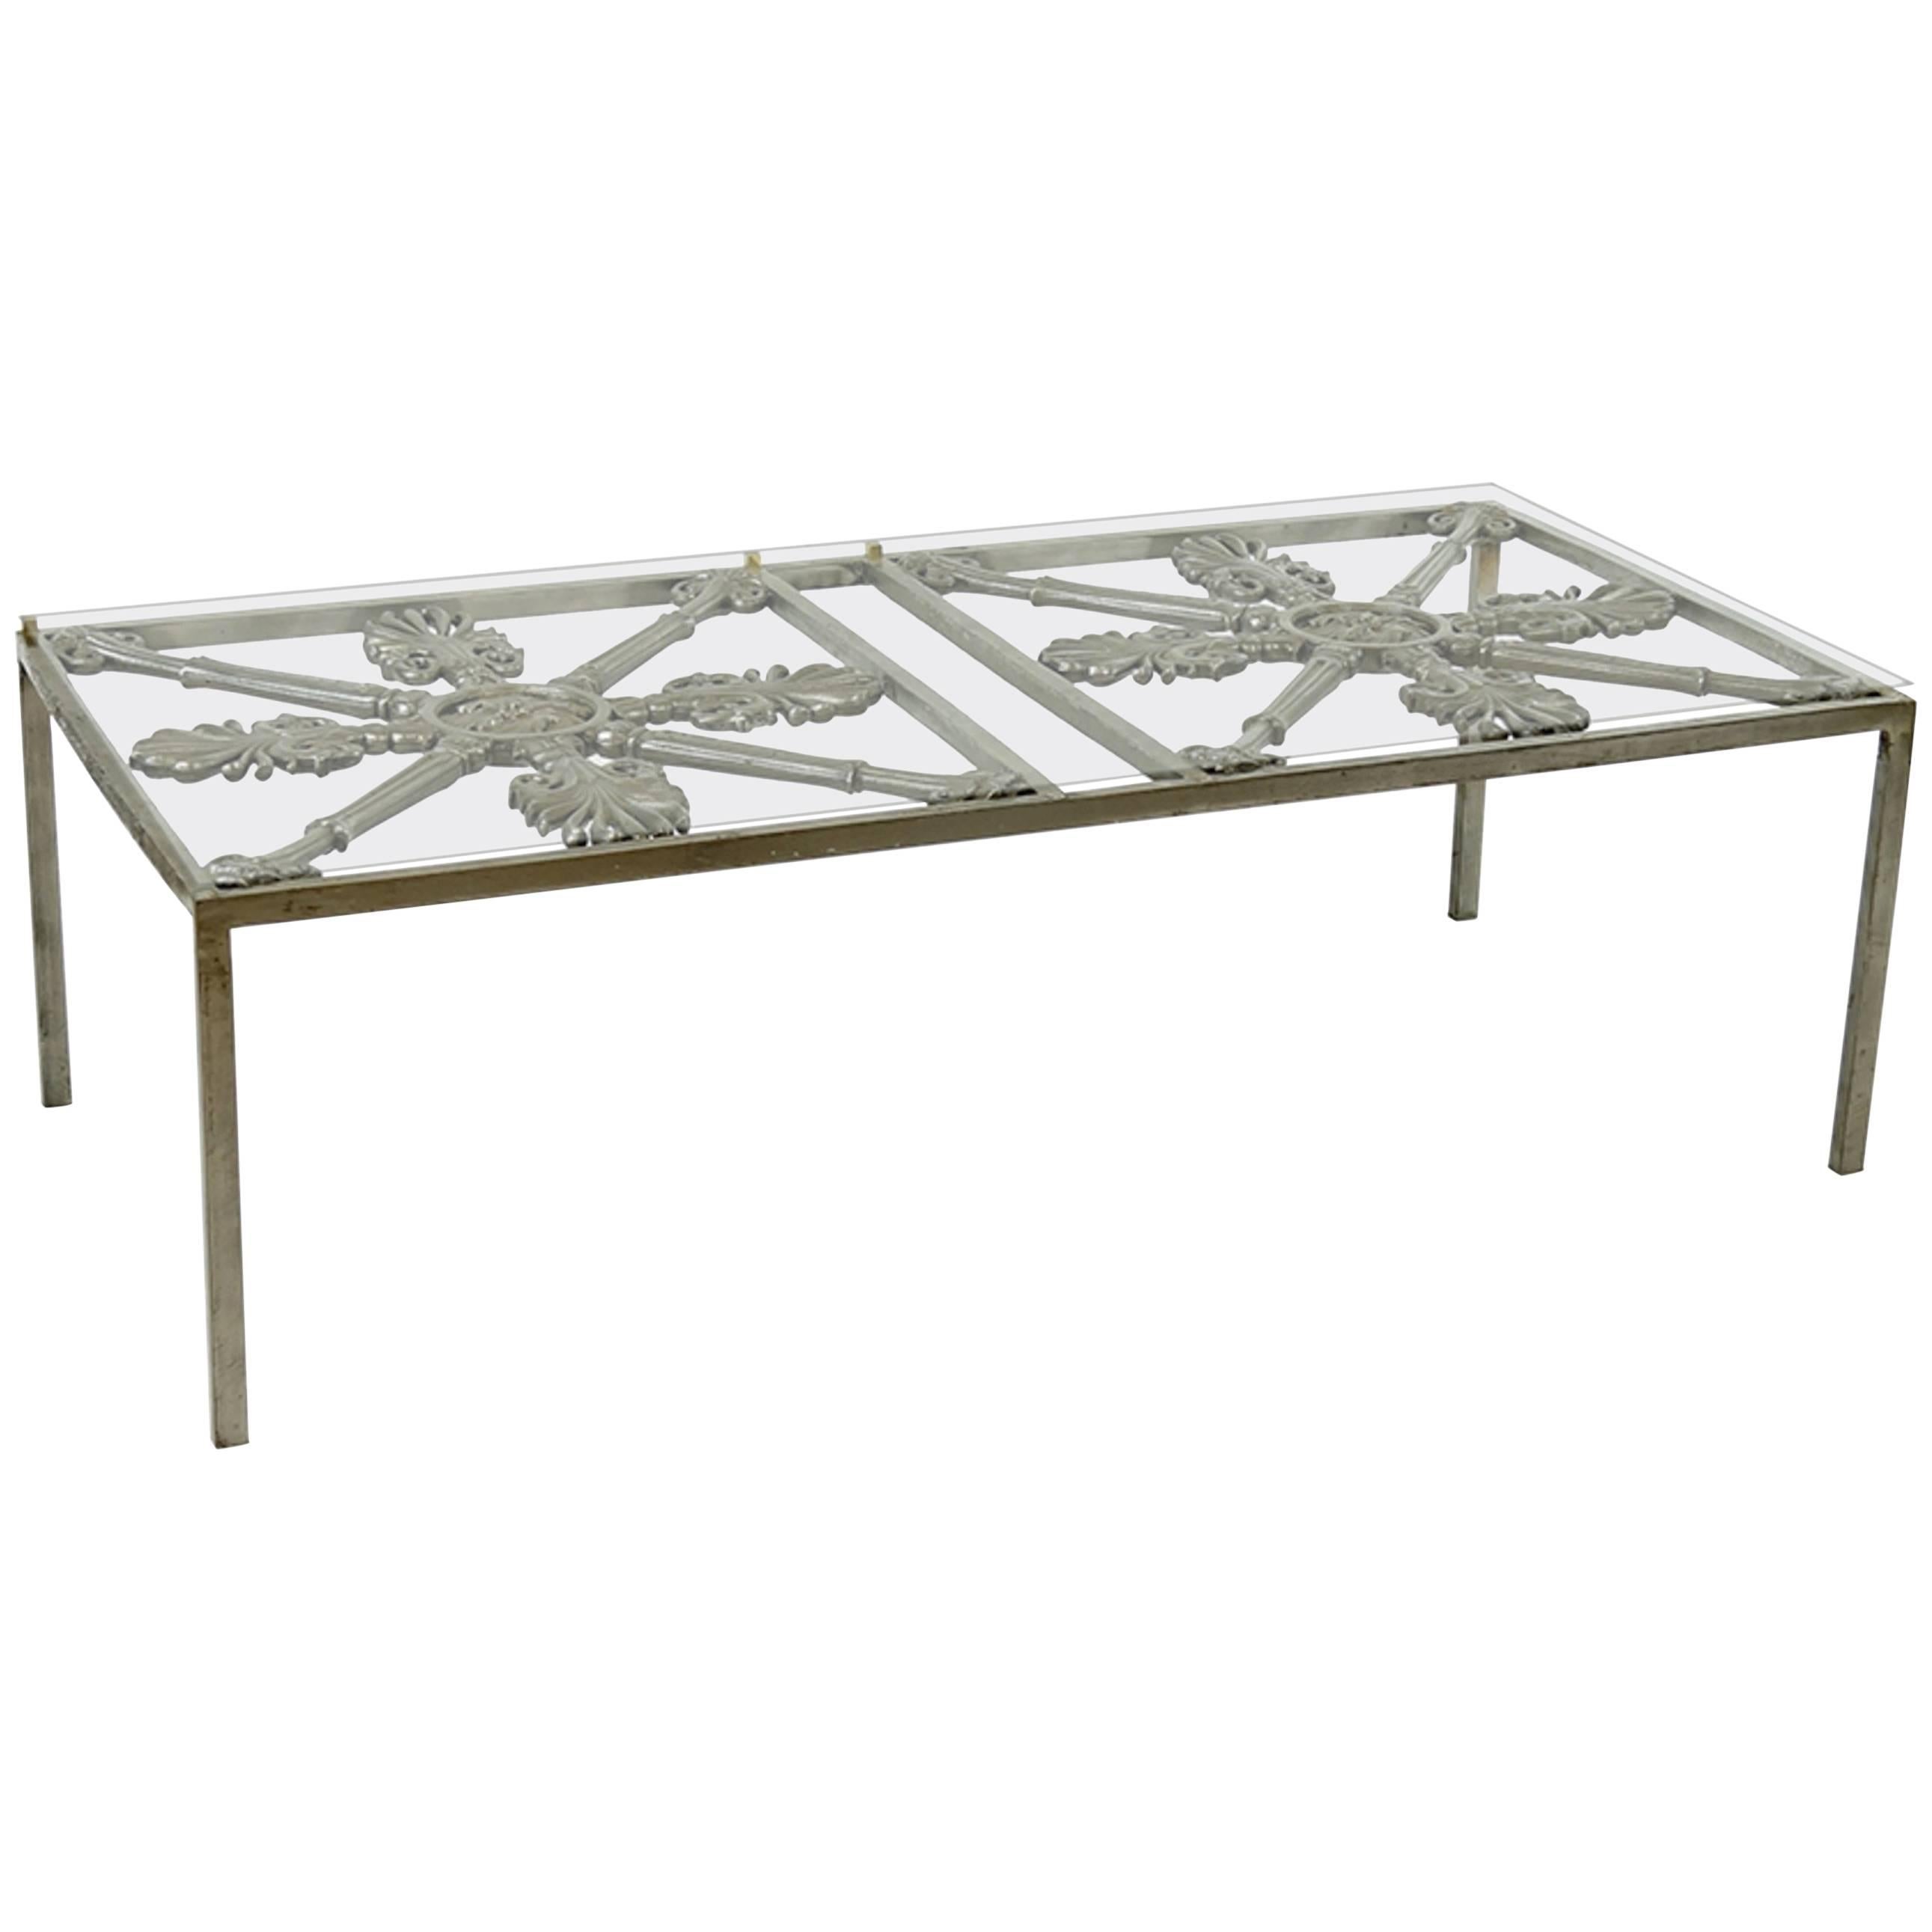 Iron Cocktail Table Made of Architectural Elements